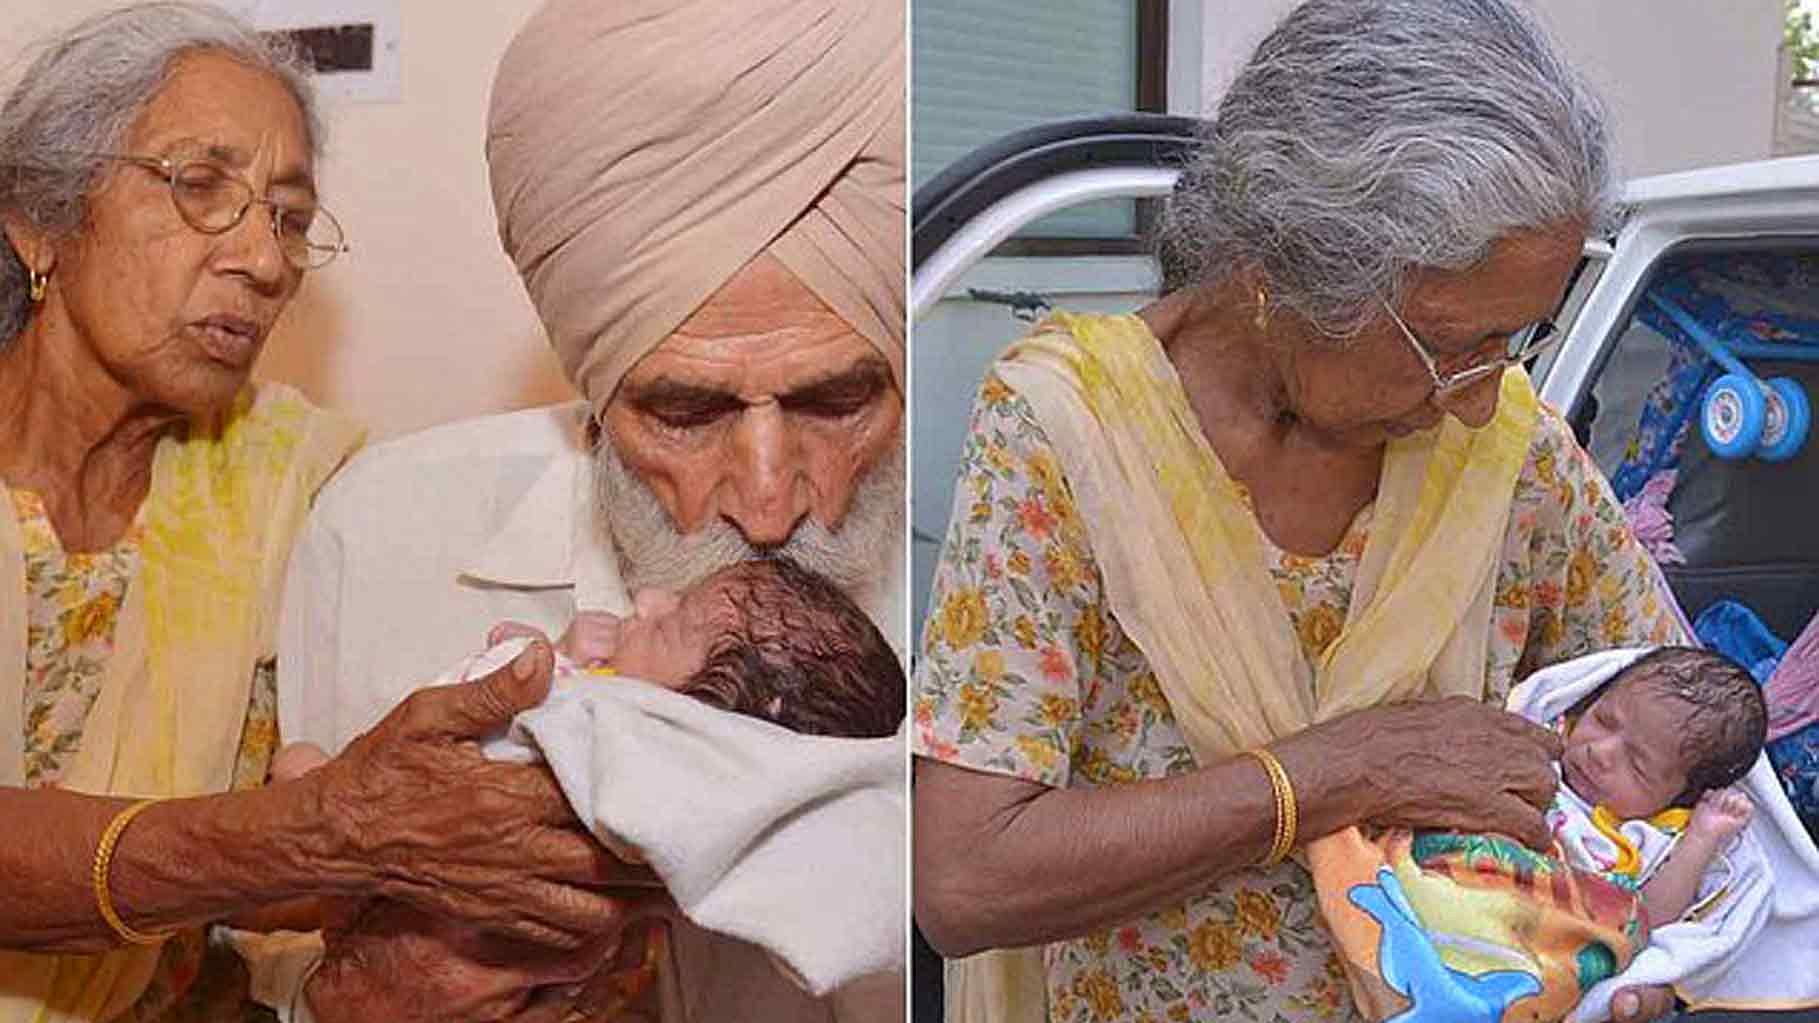 Daljinder Kaur has made international headlines after becoming a mother at 72. Her 75-year-old husband is elated. But should they have been allowed to use science to become parents at this age? (Photo courtesy: ANI)